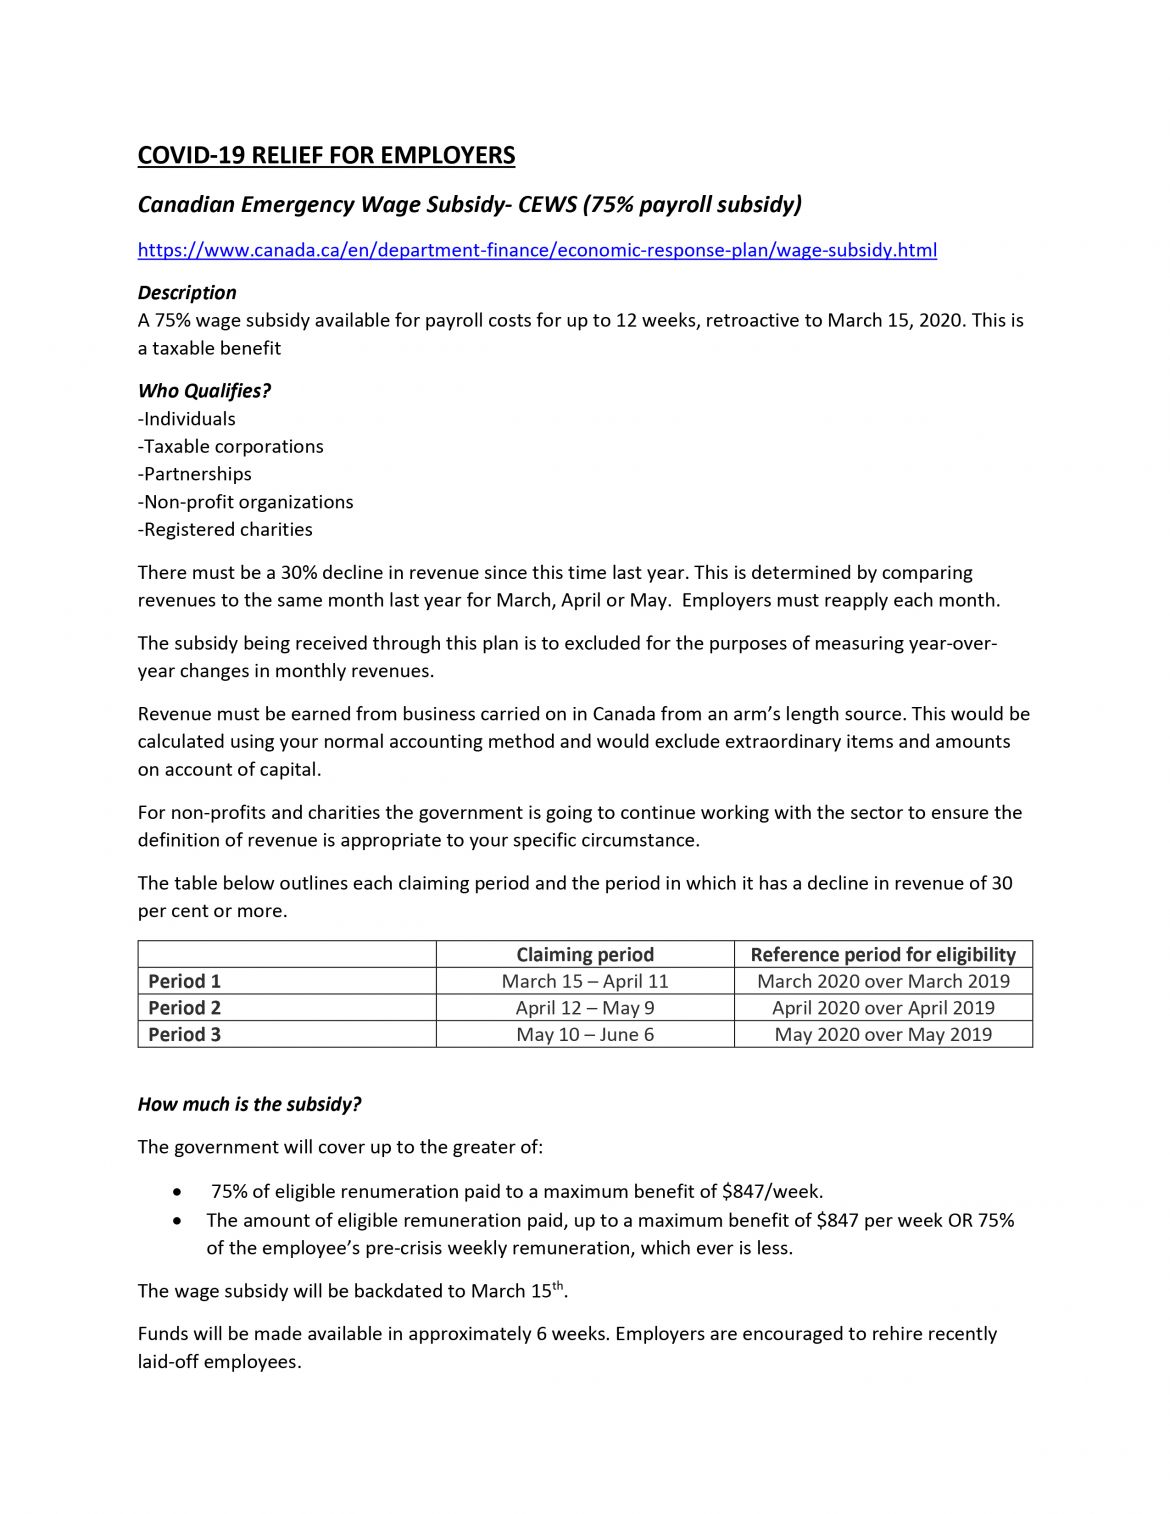 covid relief for employers update 5 1